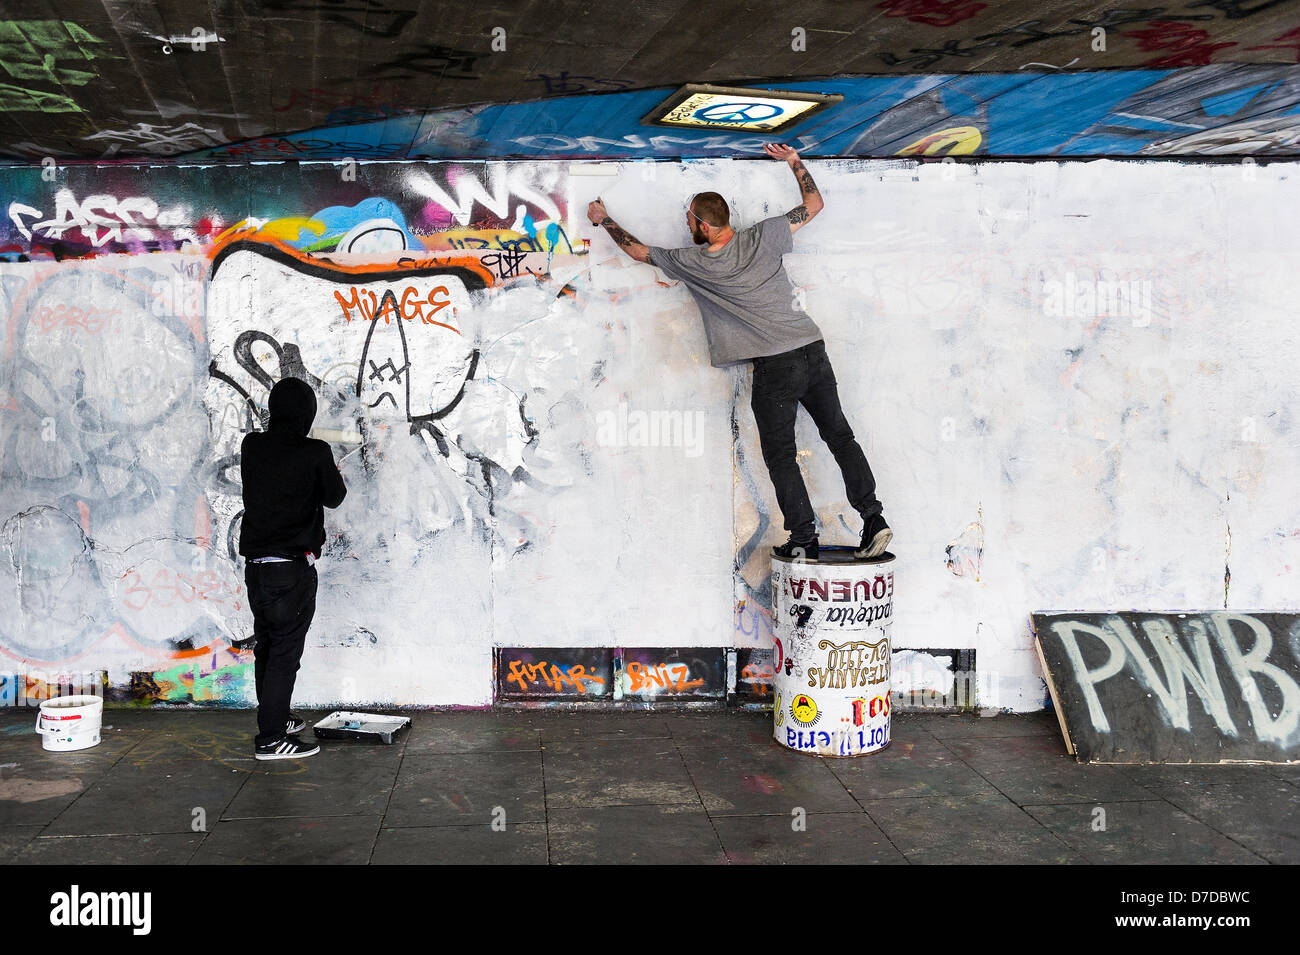 May 4th 2013 at the Southbank Centre, London. Skateboarders prepare the Undercroft in readiness for their three day protest at losing their skateboard facilities on the Southbank in London.  Photographer: Gordon Scammell/Alamy Live News Stock Photo